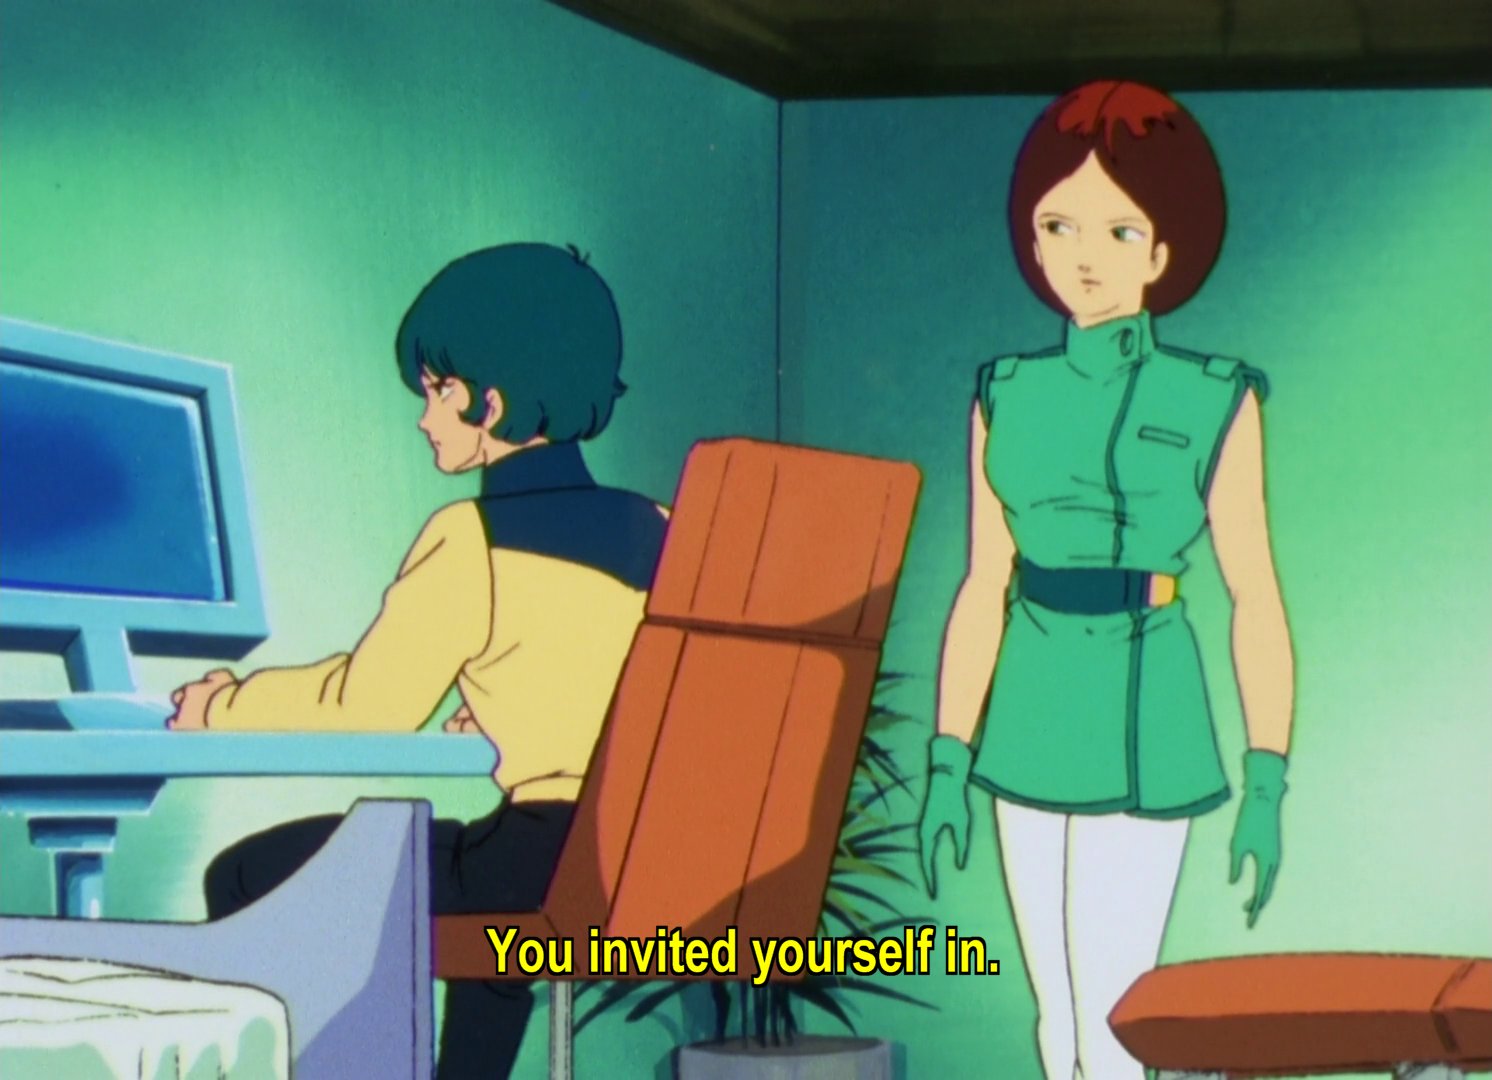 Kamille angry at a desk, with Emma, a woman with chin length brown hair.  Kamille: You invited yourself in.